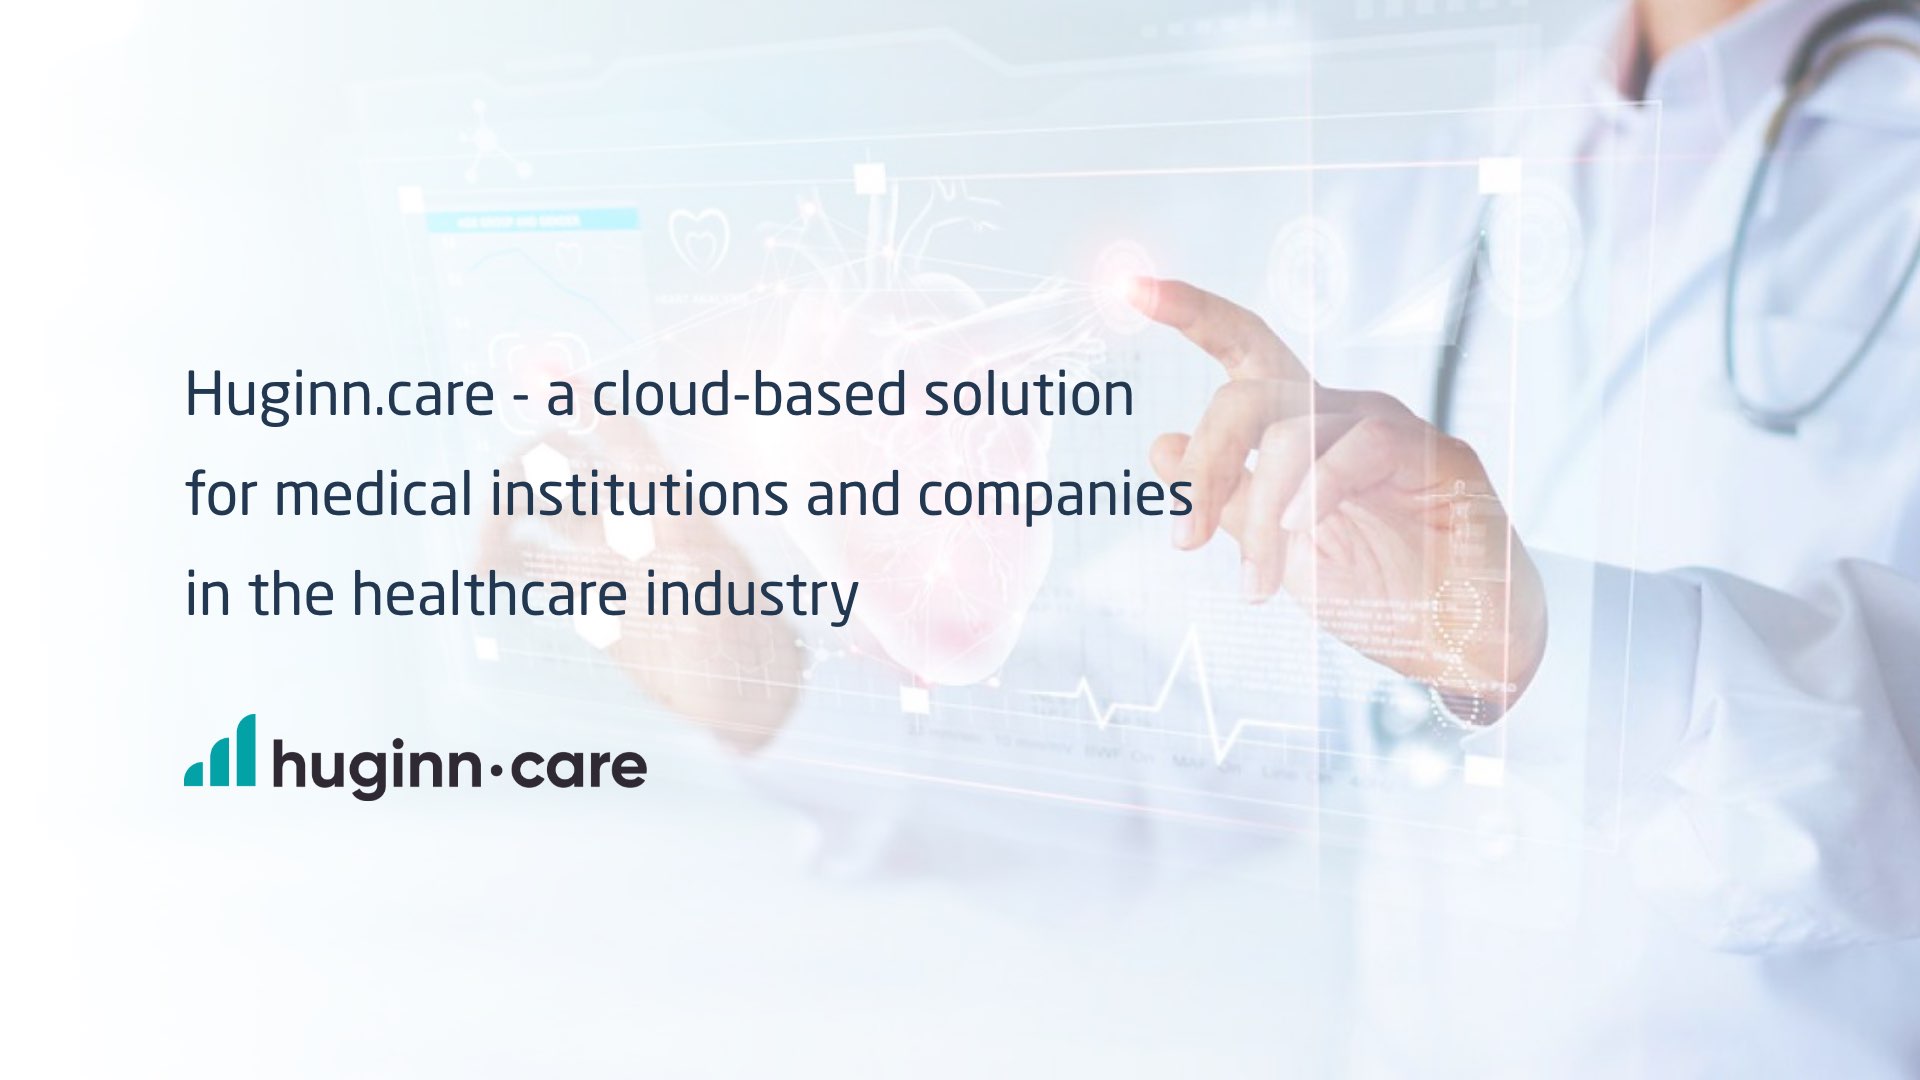 Huginn.care - a cloud-based solution for medical institutions and companies in the healthcare industry